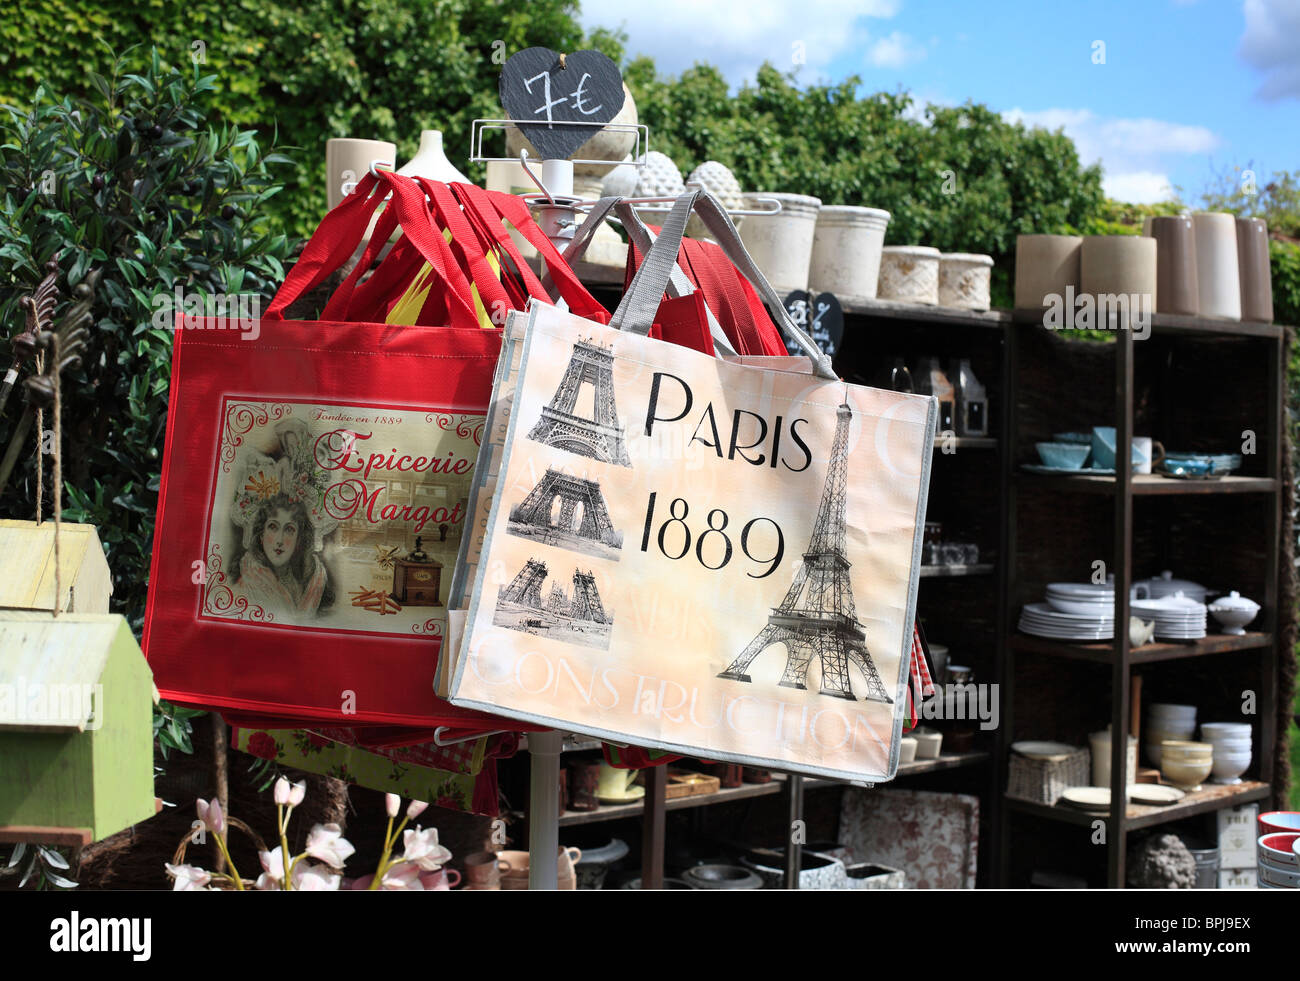 Colourful Souvenir Carrier Bags and Pottery on Display in a French Village Courtyard. Stock Photo